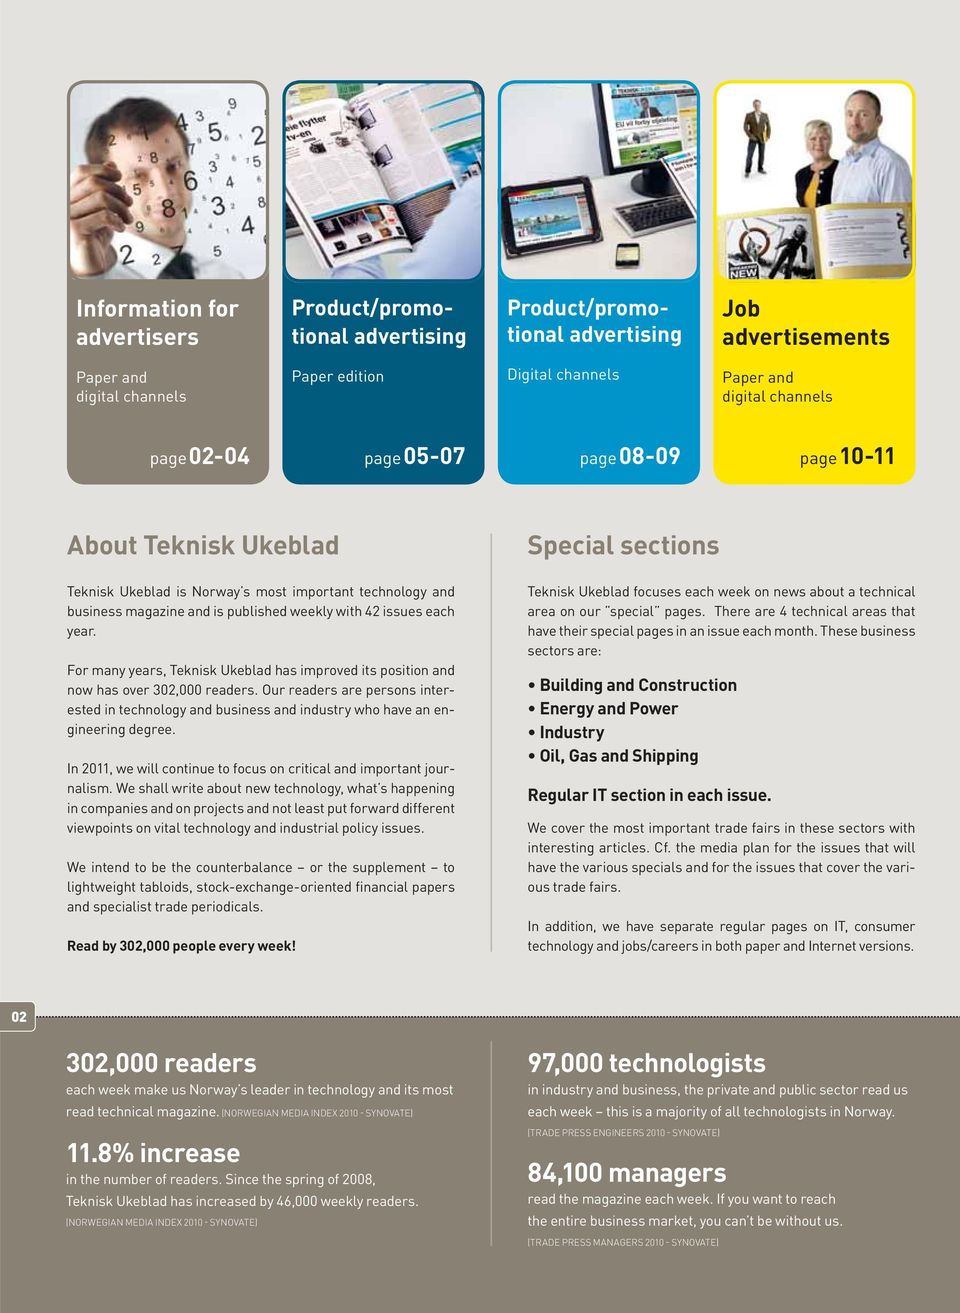 For many years, Teknisk Ukeblad has improved its position and now has over 302,000 readers. Our readers are persons interested in technology and business and industry who have an engineering degree.